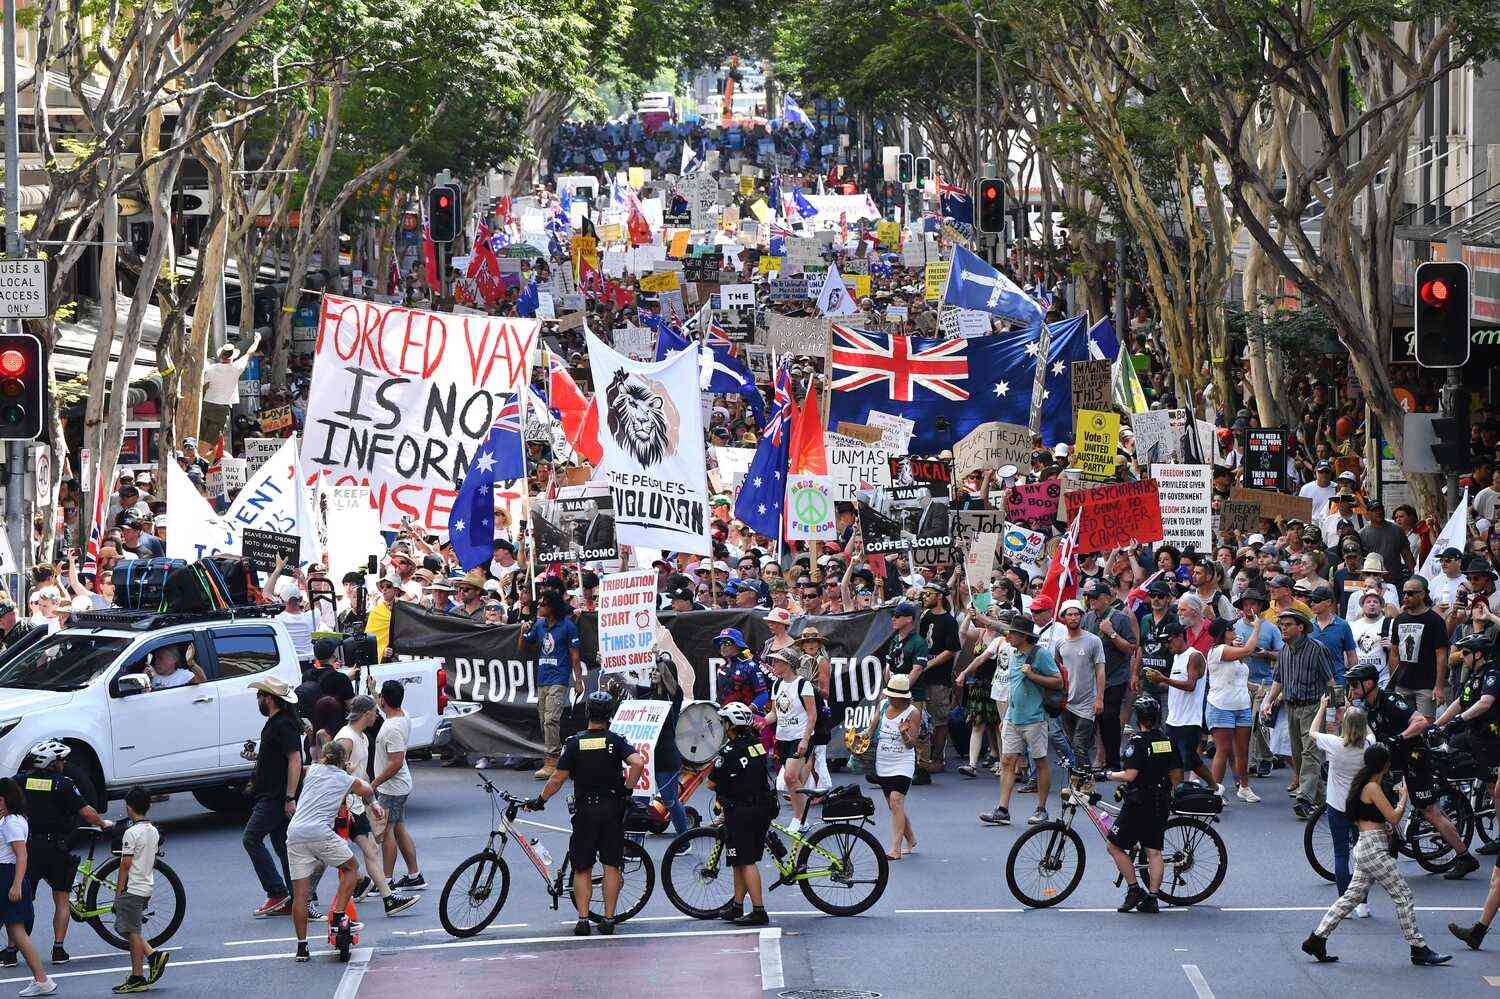 They protested a 'no-online-surveillance policy' in Australia